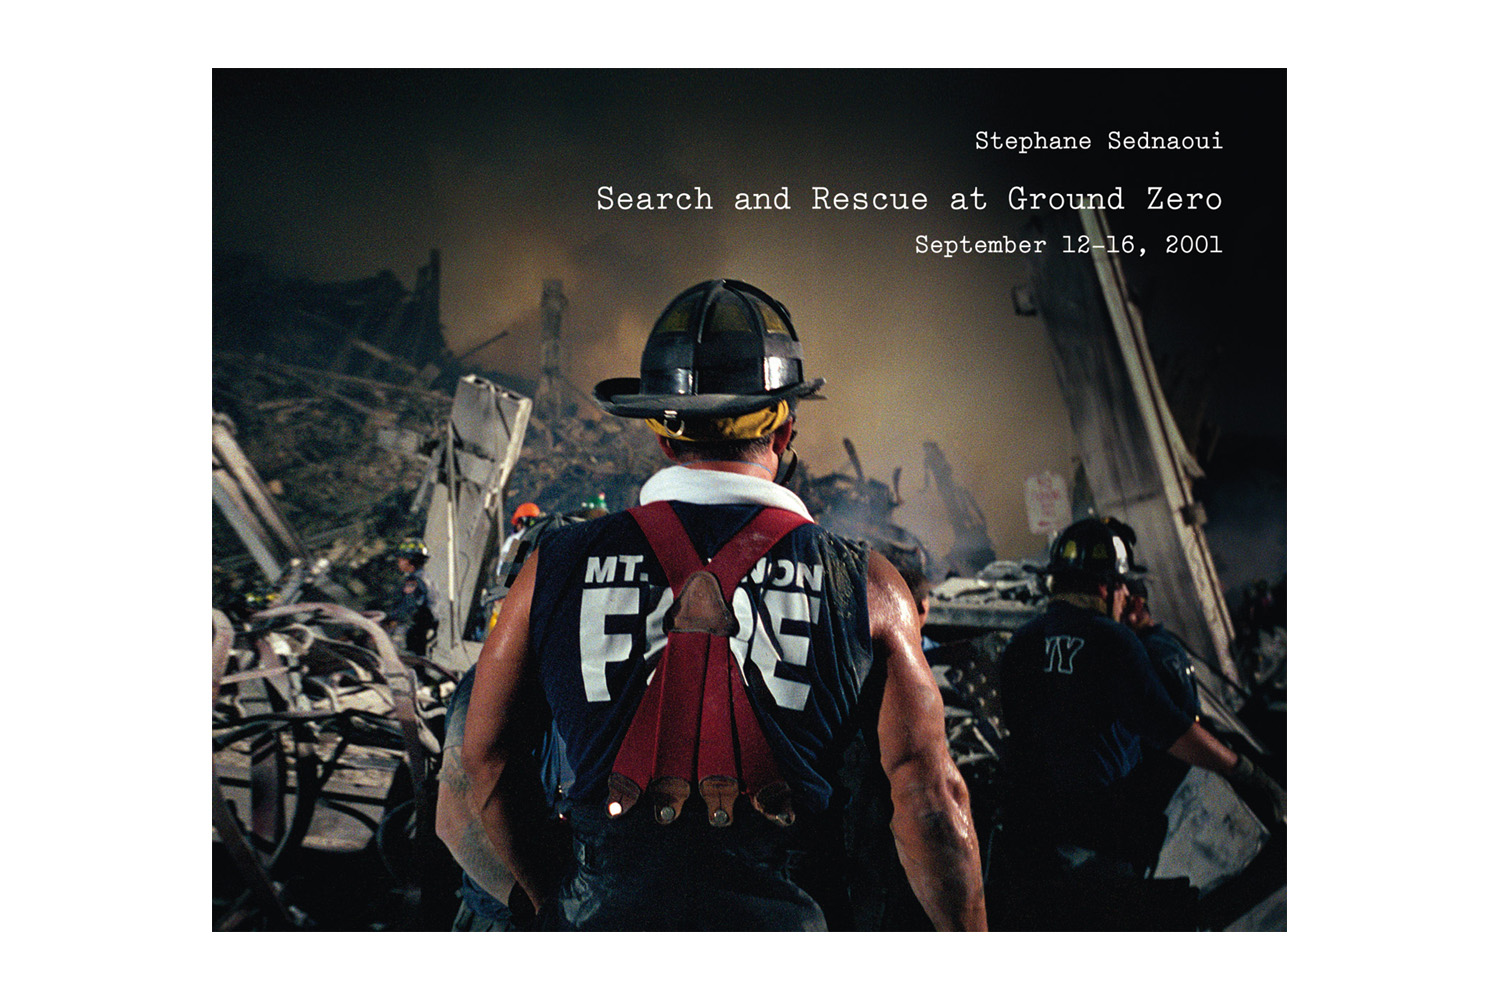 Stephane Sednaoui's Search and Rescue at Ground Zero, published by Kehrer
                              A hauntingly beautiful body of work covering the search and rescue efforts in the days following Sept.11, 2001. Heroic and heartbreaking, Sednaoui's images convey both the immense loss in the immediate aftermath, and the glow of hope that rose from the rubble.